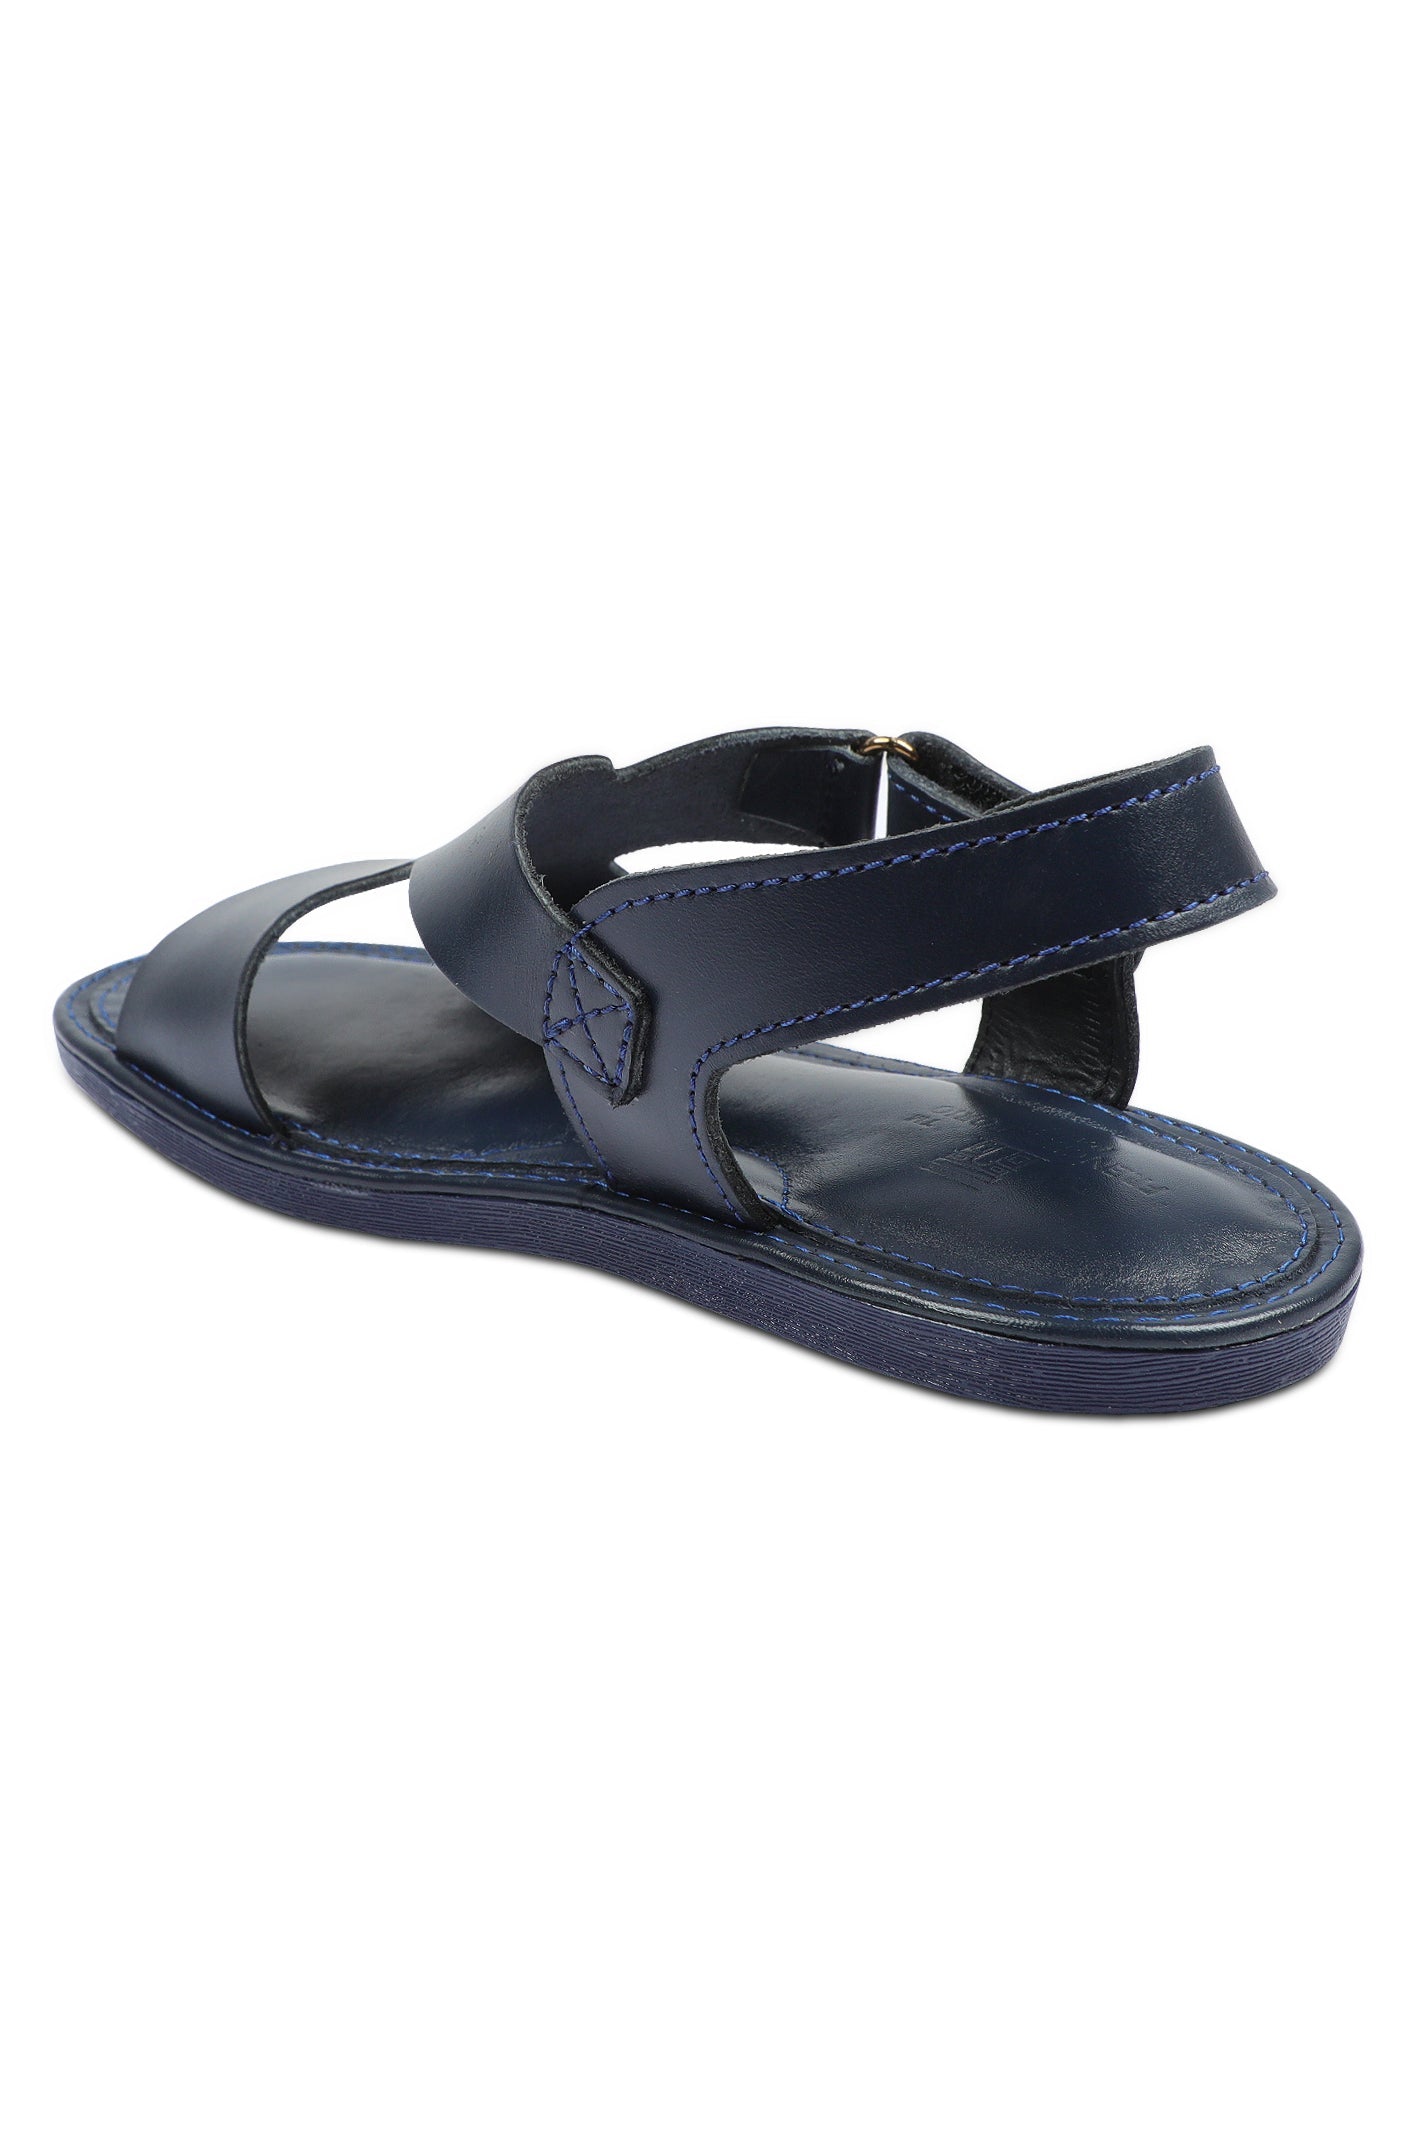 French Emporio Men Sandals SKU: SLD-0030-BLUE - Diners